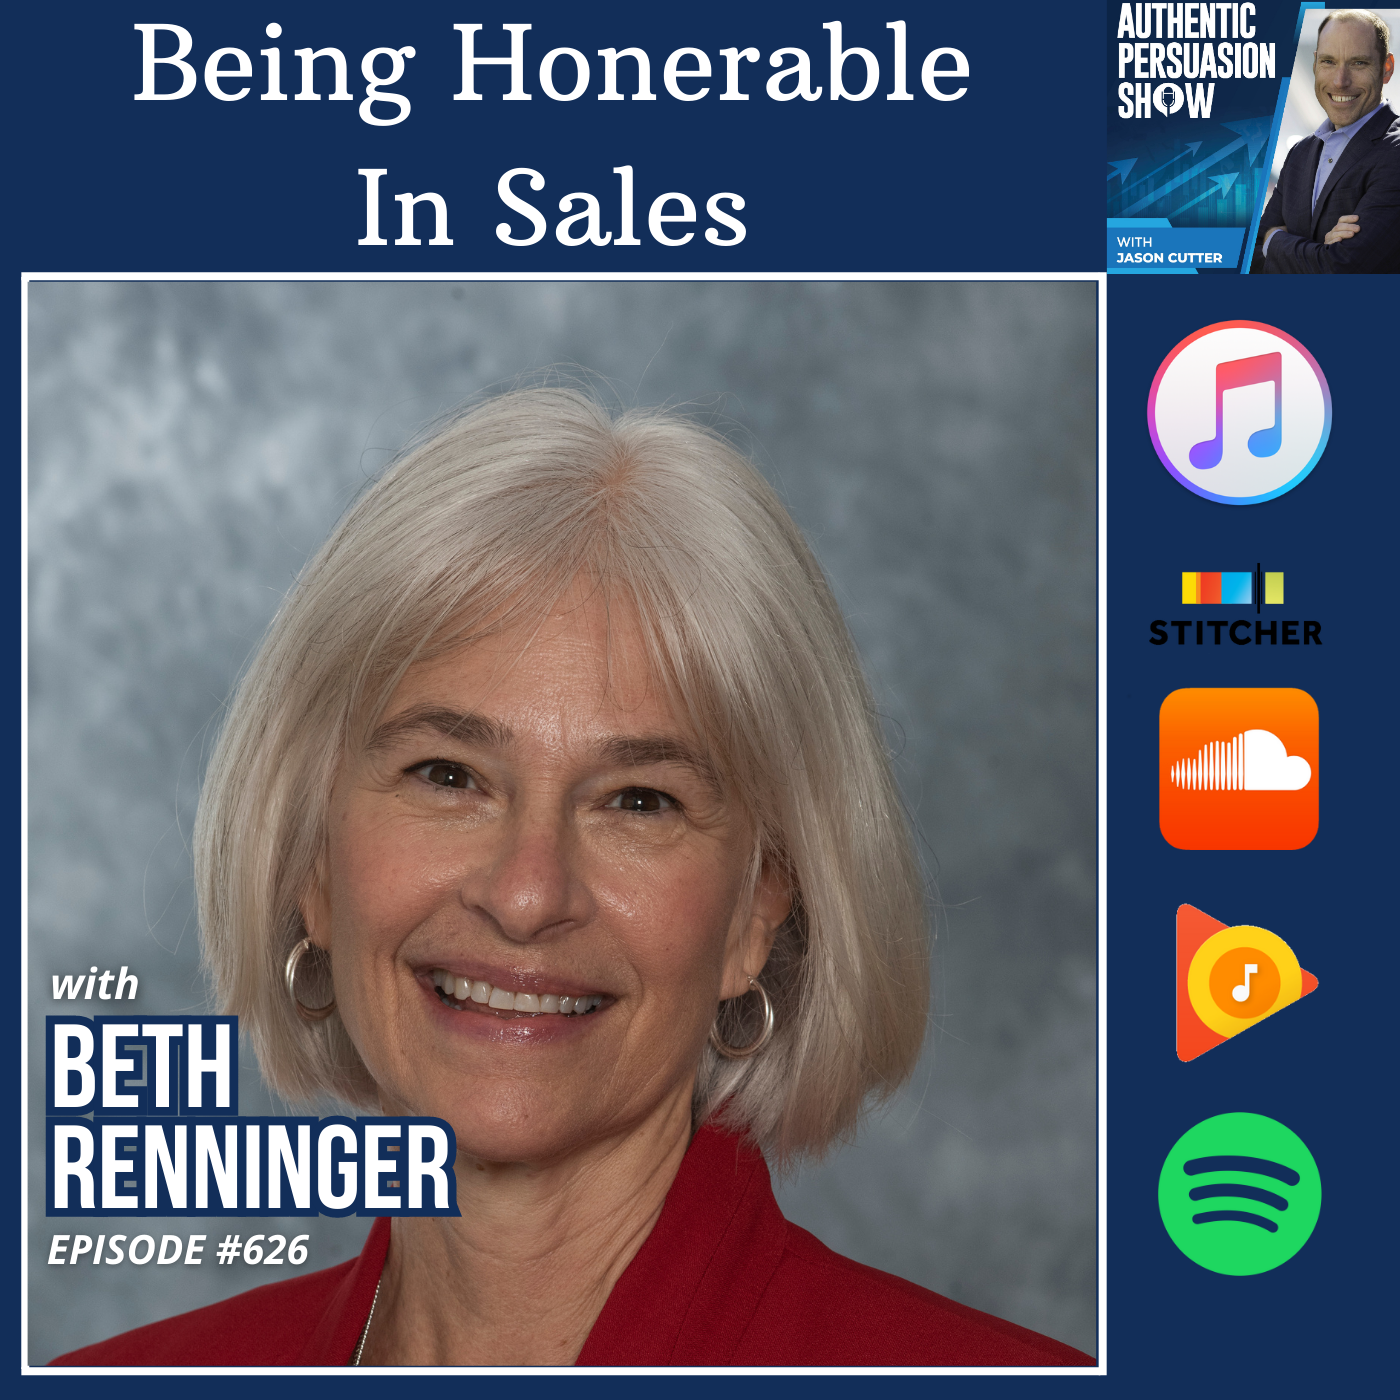 [626] Being Honerable In Sales, with Beth Renninger from University of South Carolina